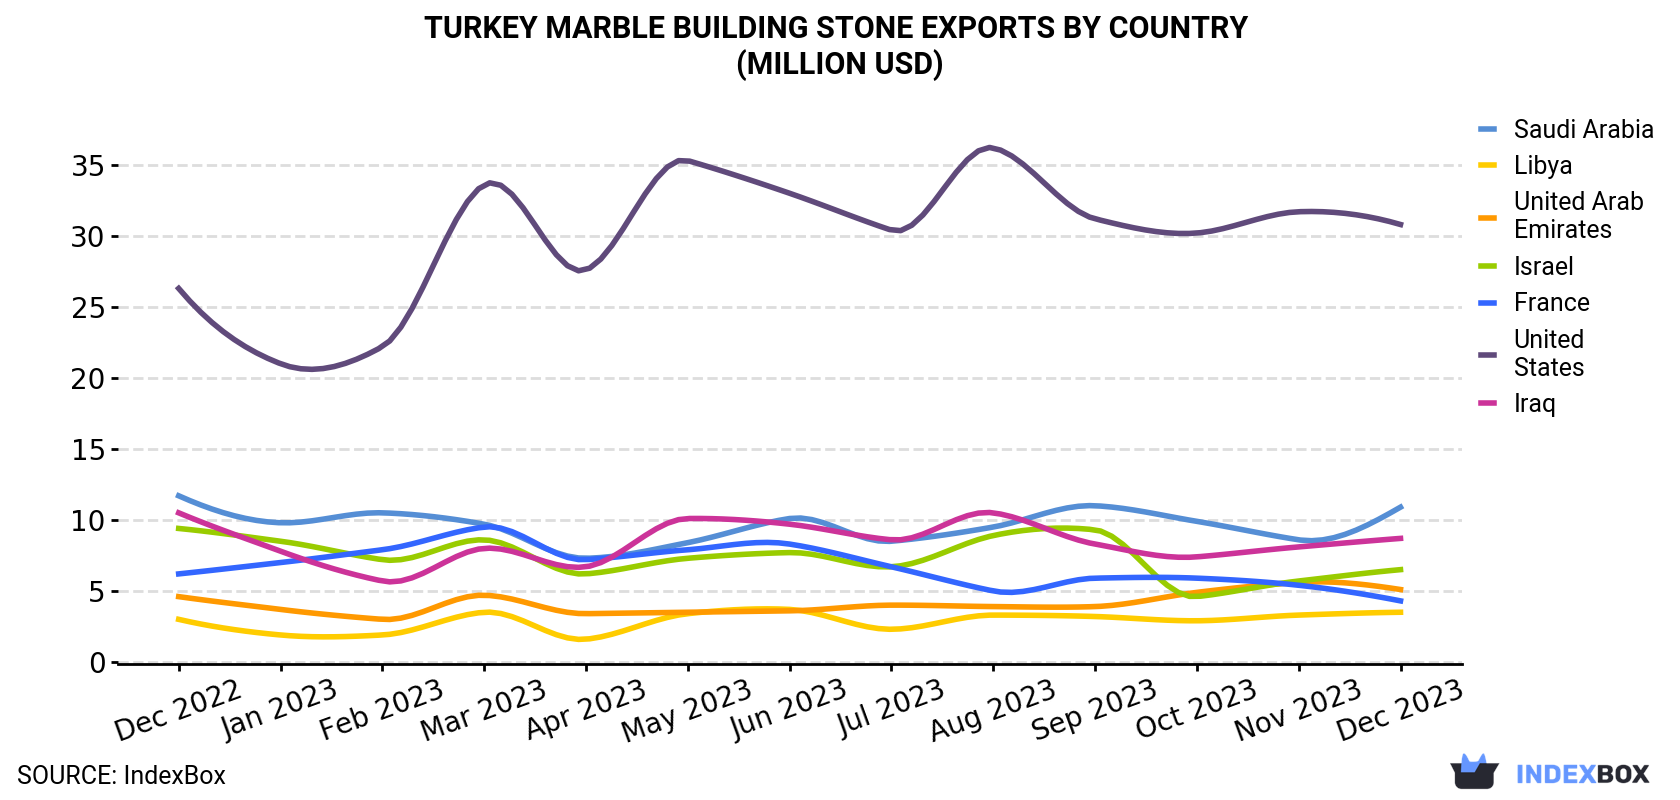 Turkey Marble Building Stone Exports By Country (Million USD)